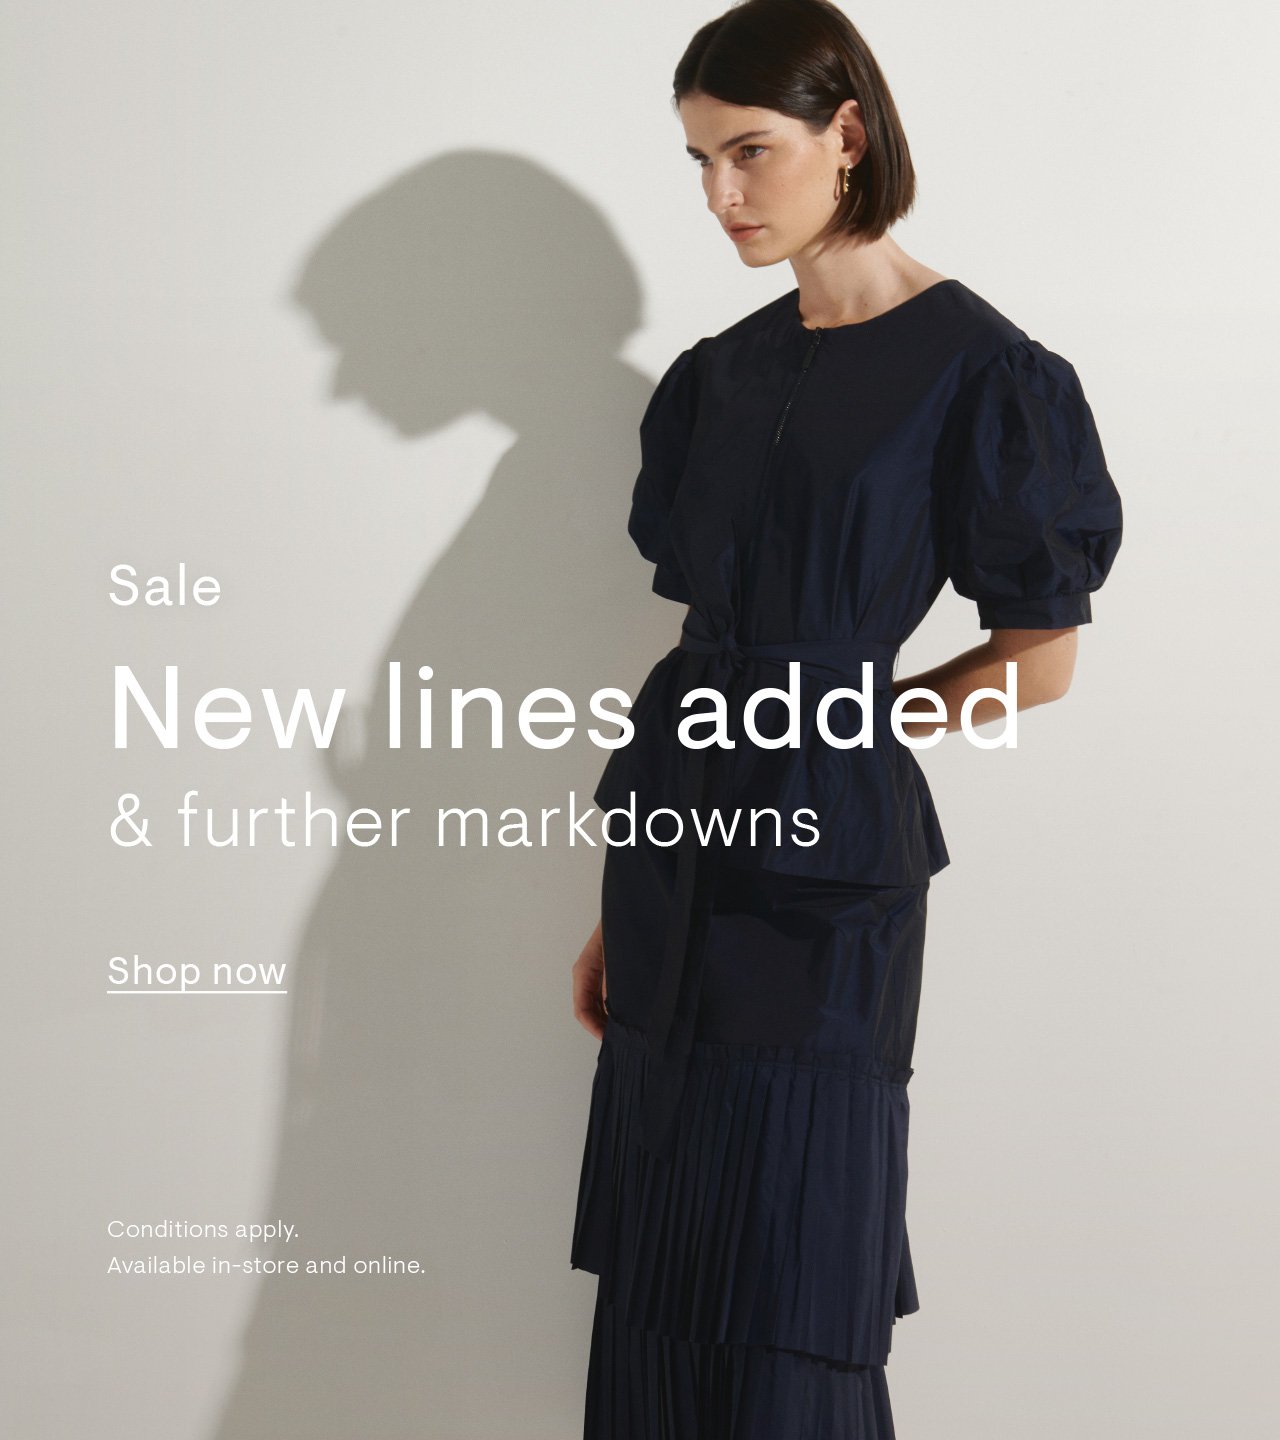 Sale. New lines added & further markdowns. Shop Now.